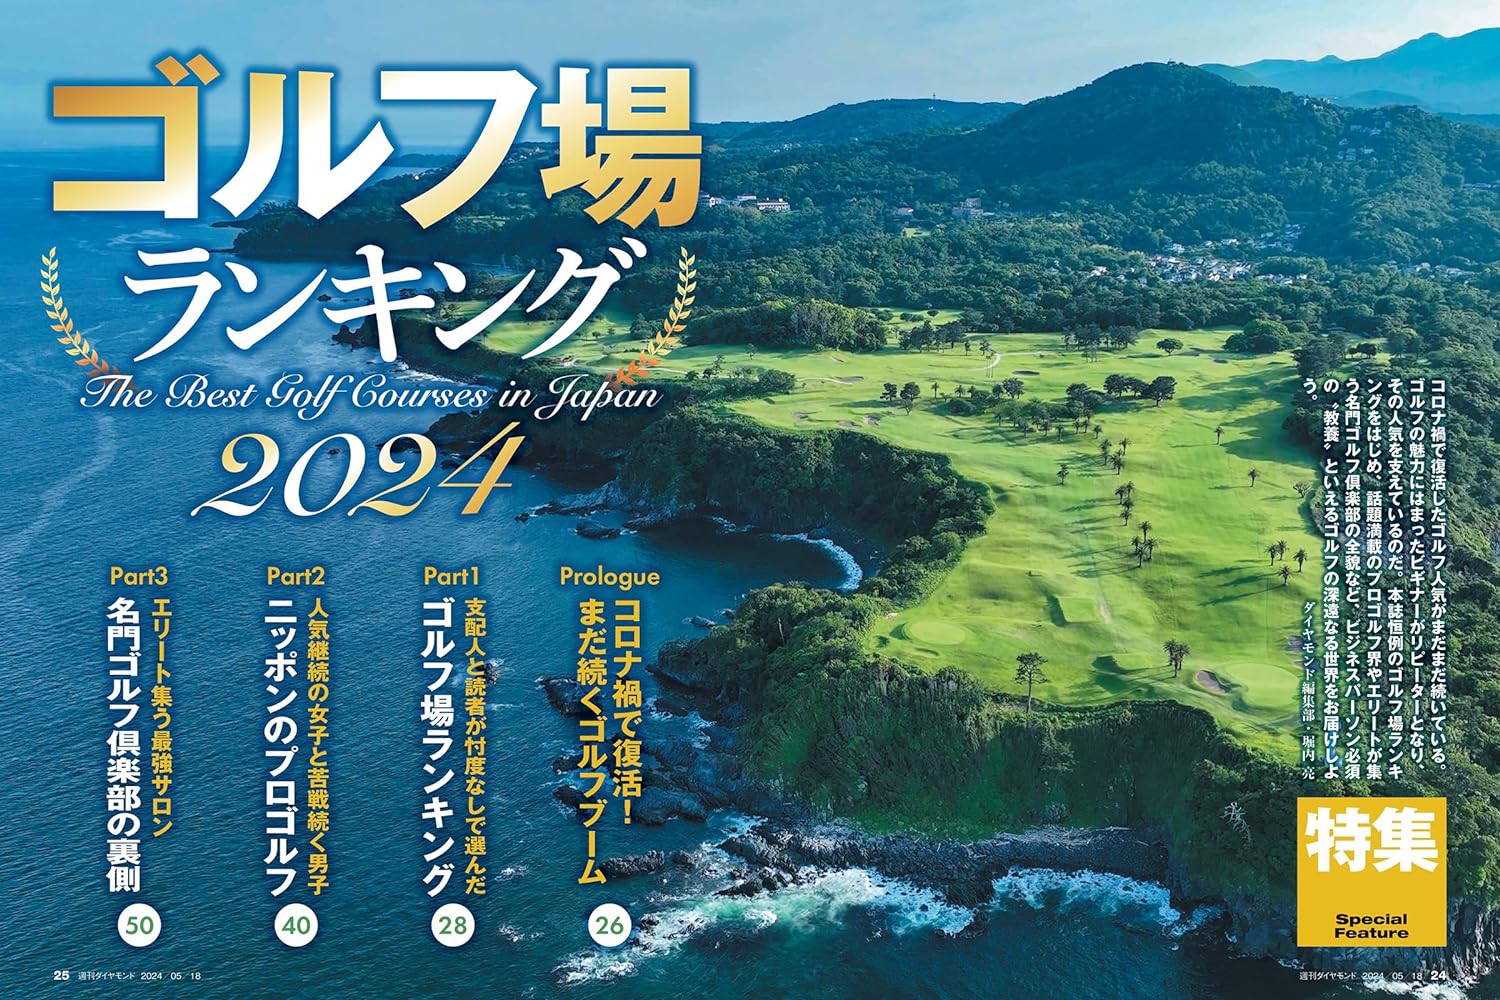  weekly diamond 2024 year 5/18 number golf course ranking 2024